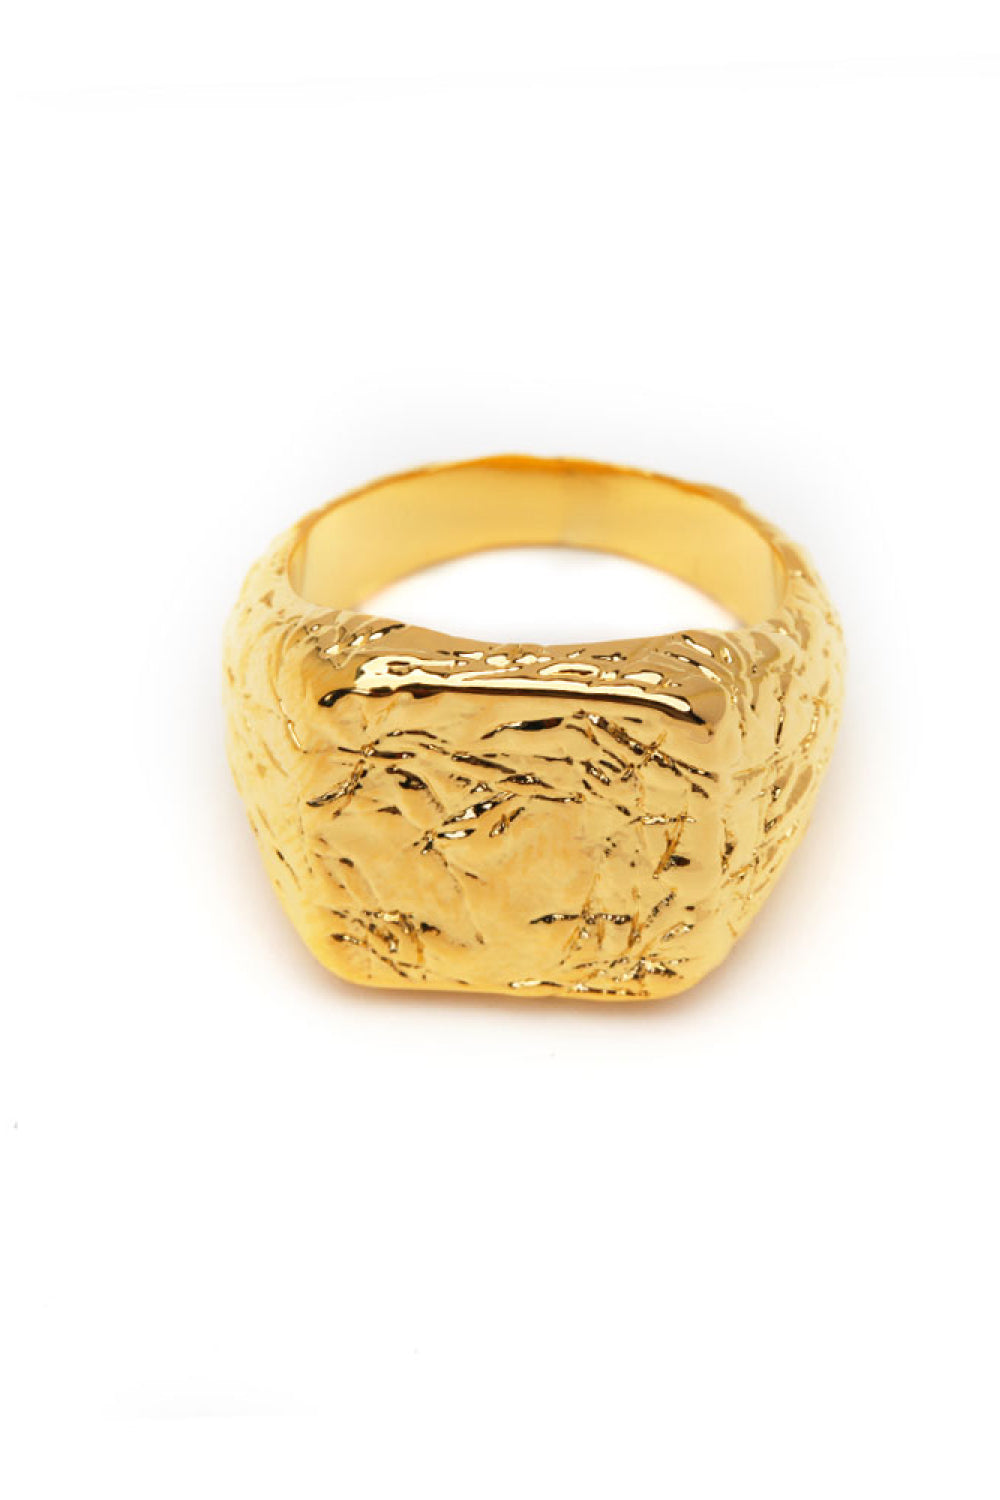 Textured Gold-Plated Ring Print on any thing USA/STOD clothes